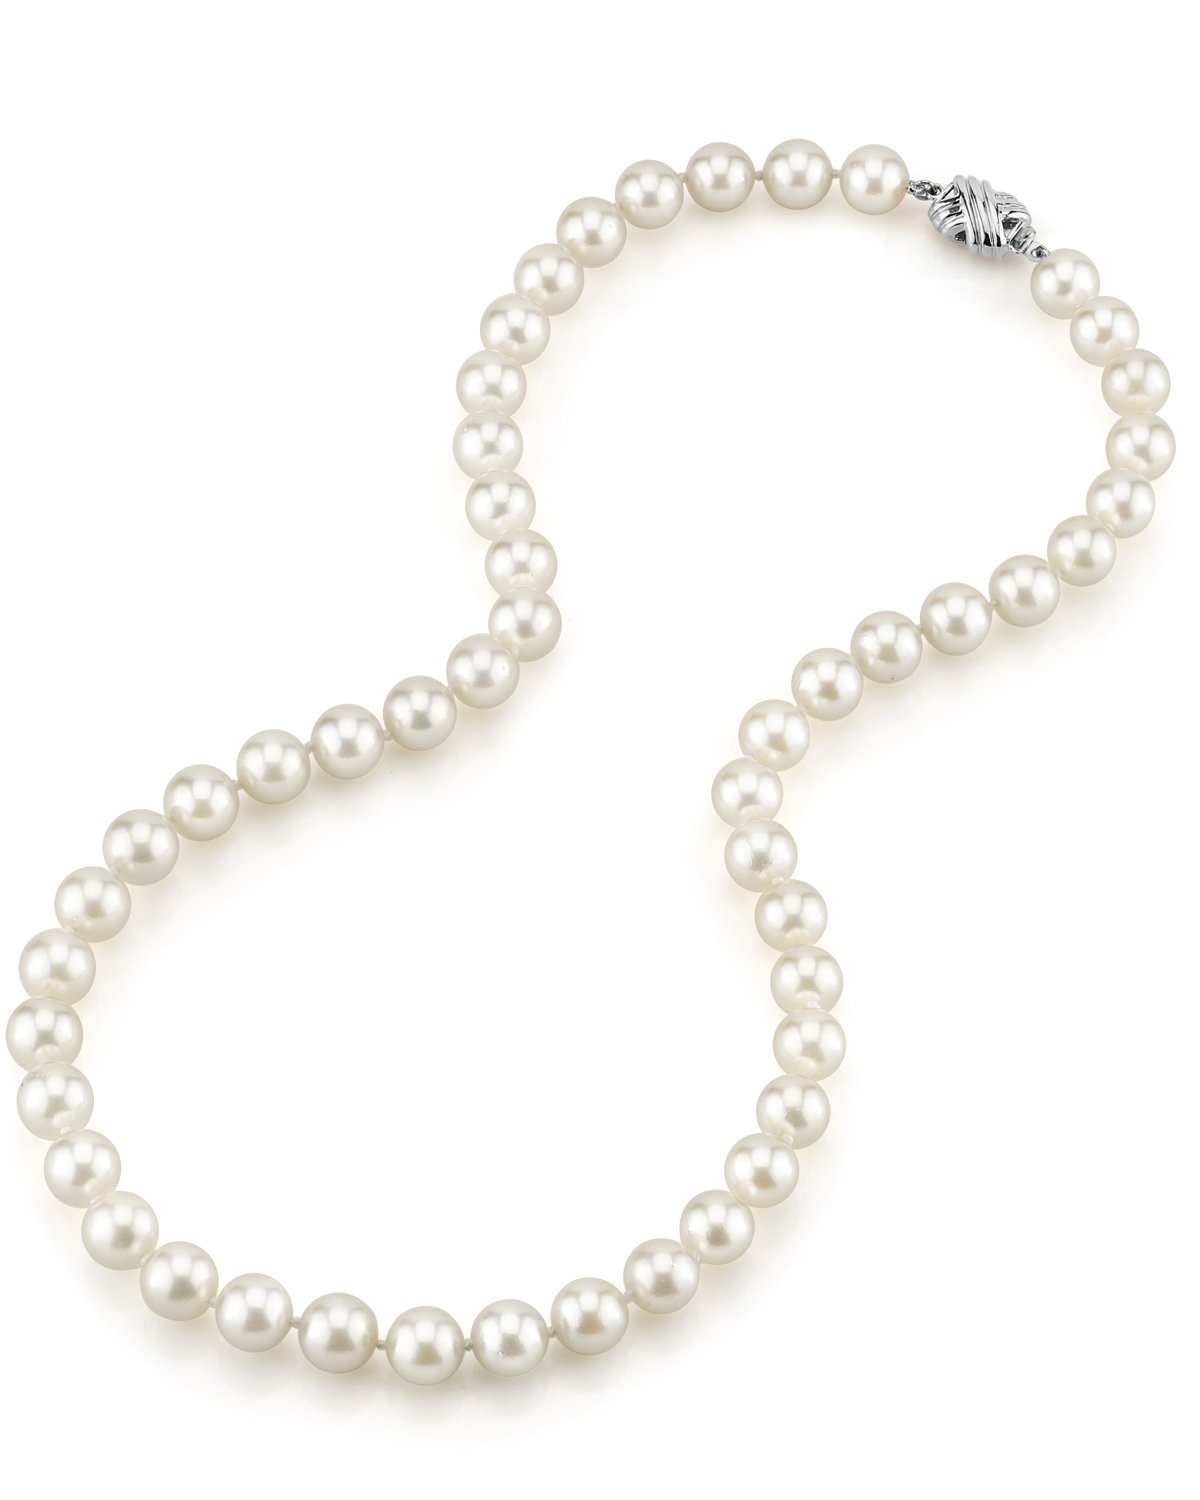 8.0-8.5mm Japanese Akoya White Pearl Necklace- AAA Quality